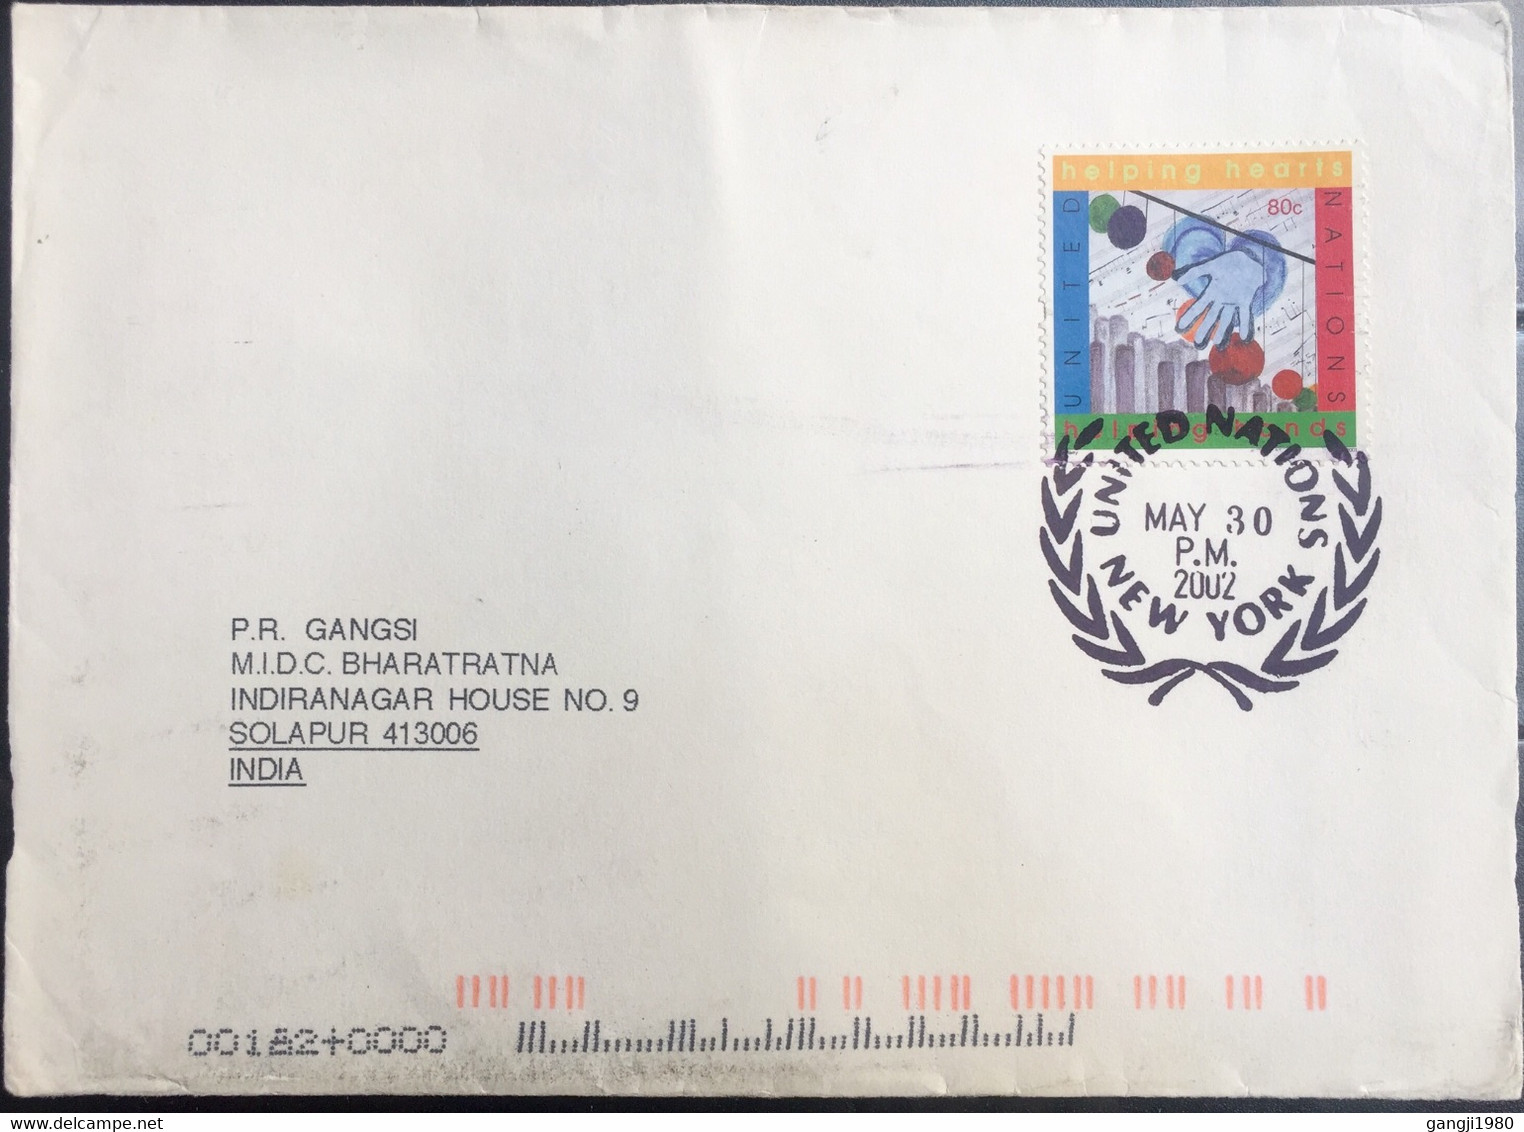 UNITED NATION 2002, USED COVER TO INDIA,HELPING HEART HANDS STAMPS NEW YORK CANCELLATION - Covers & Documents